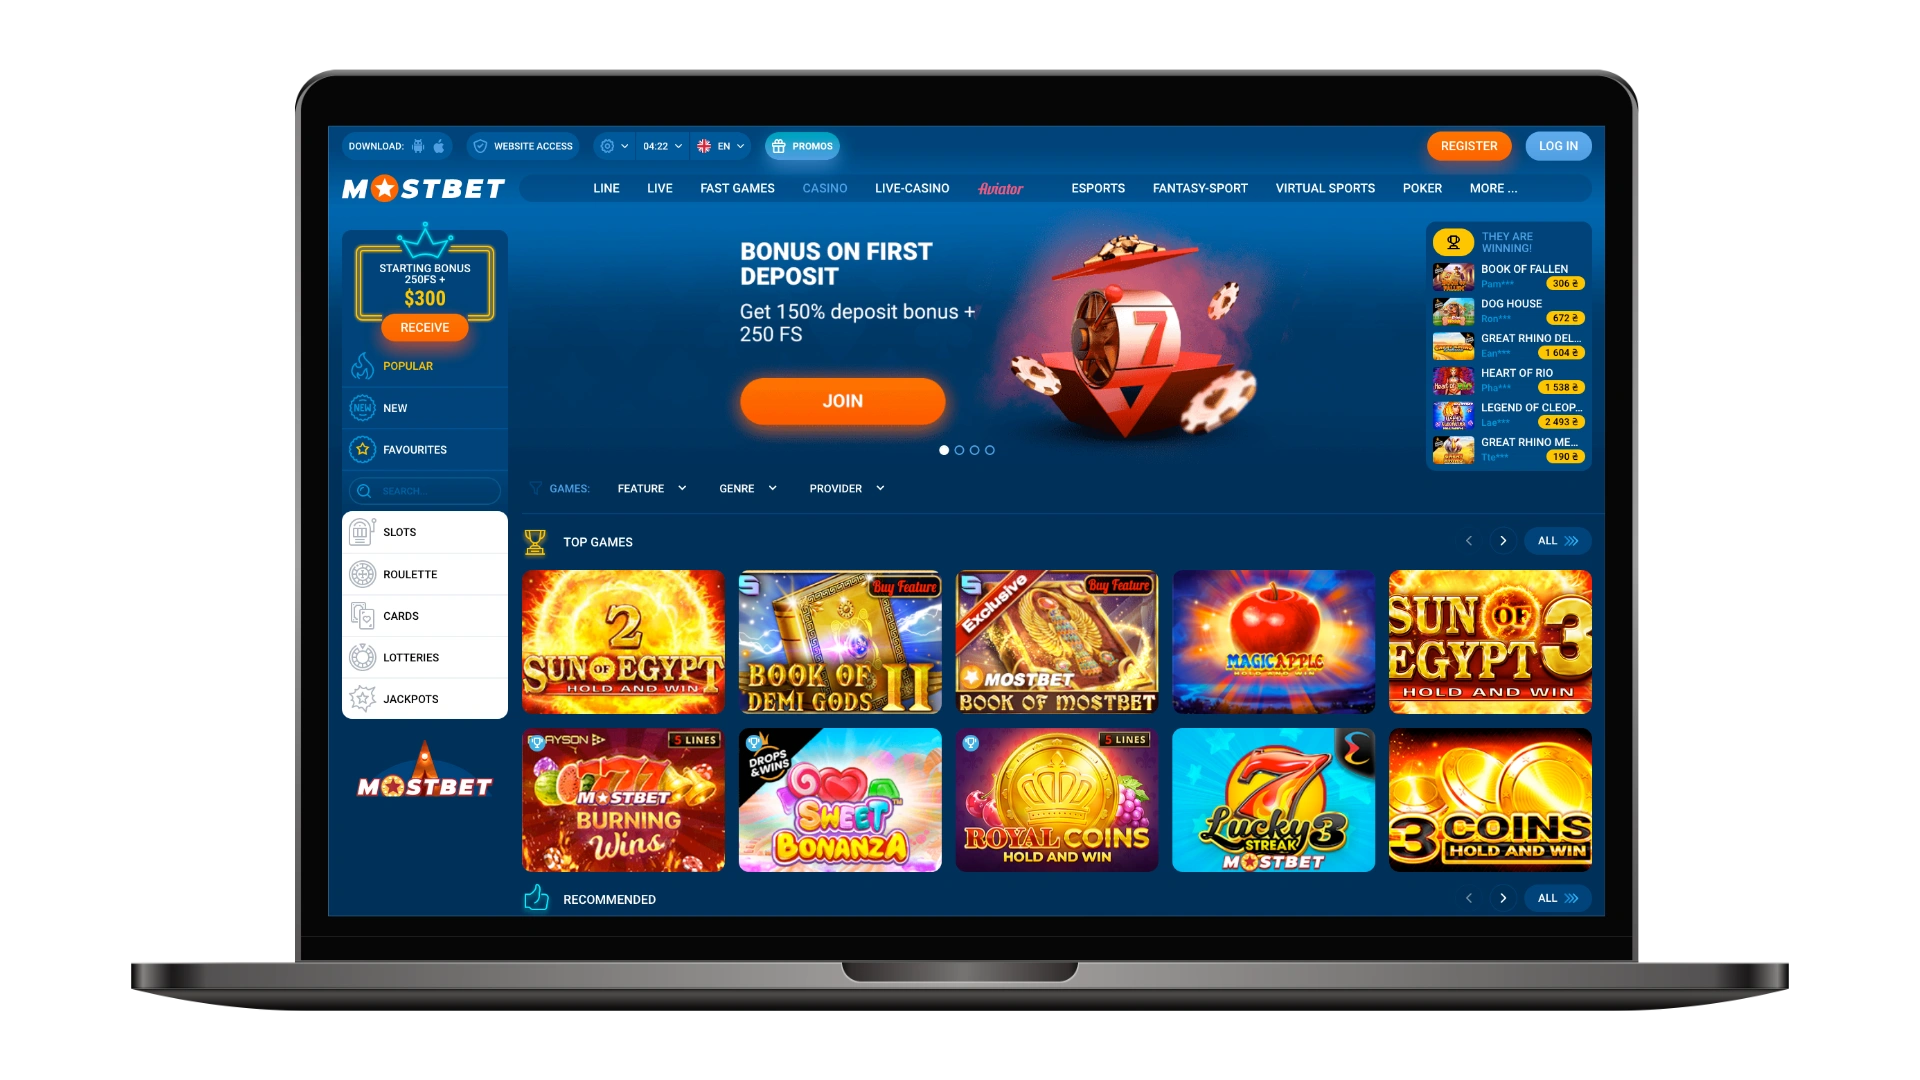 A detailed review of the online casino Mostbet